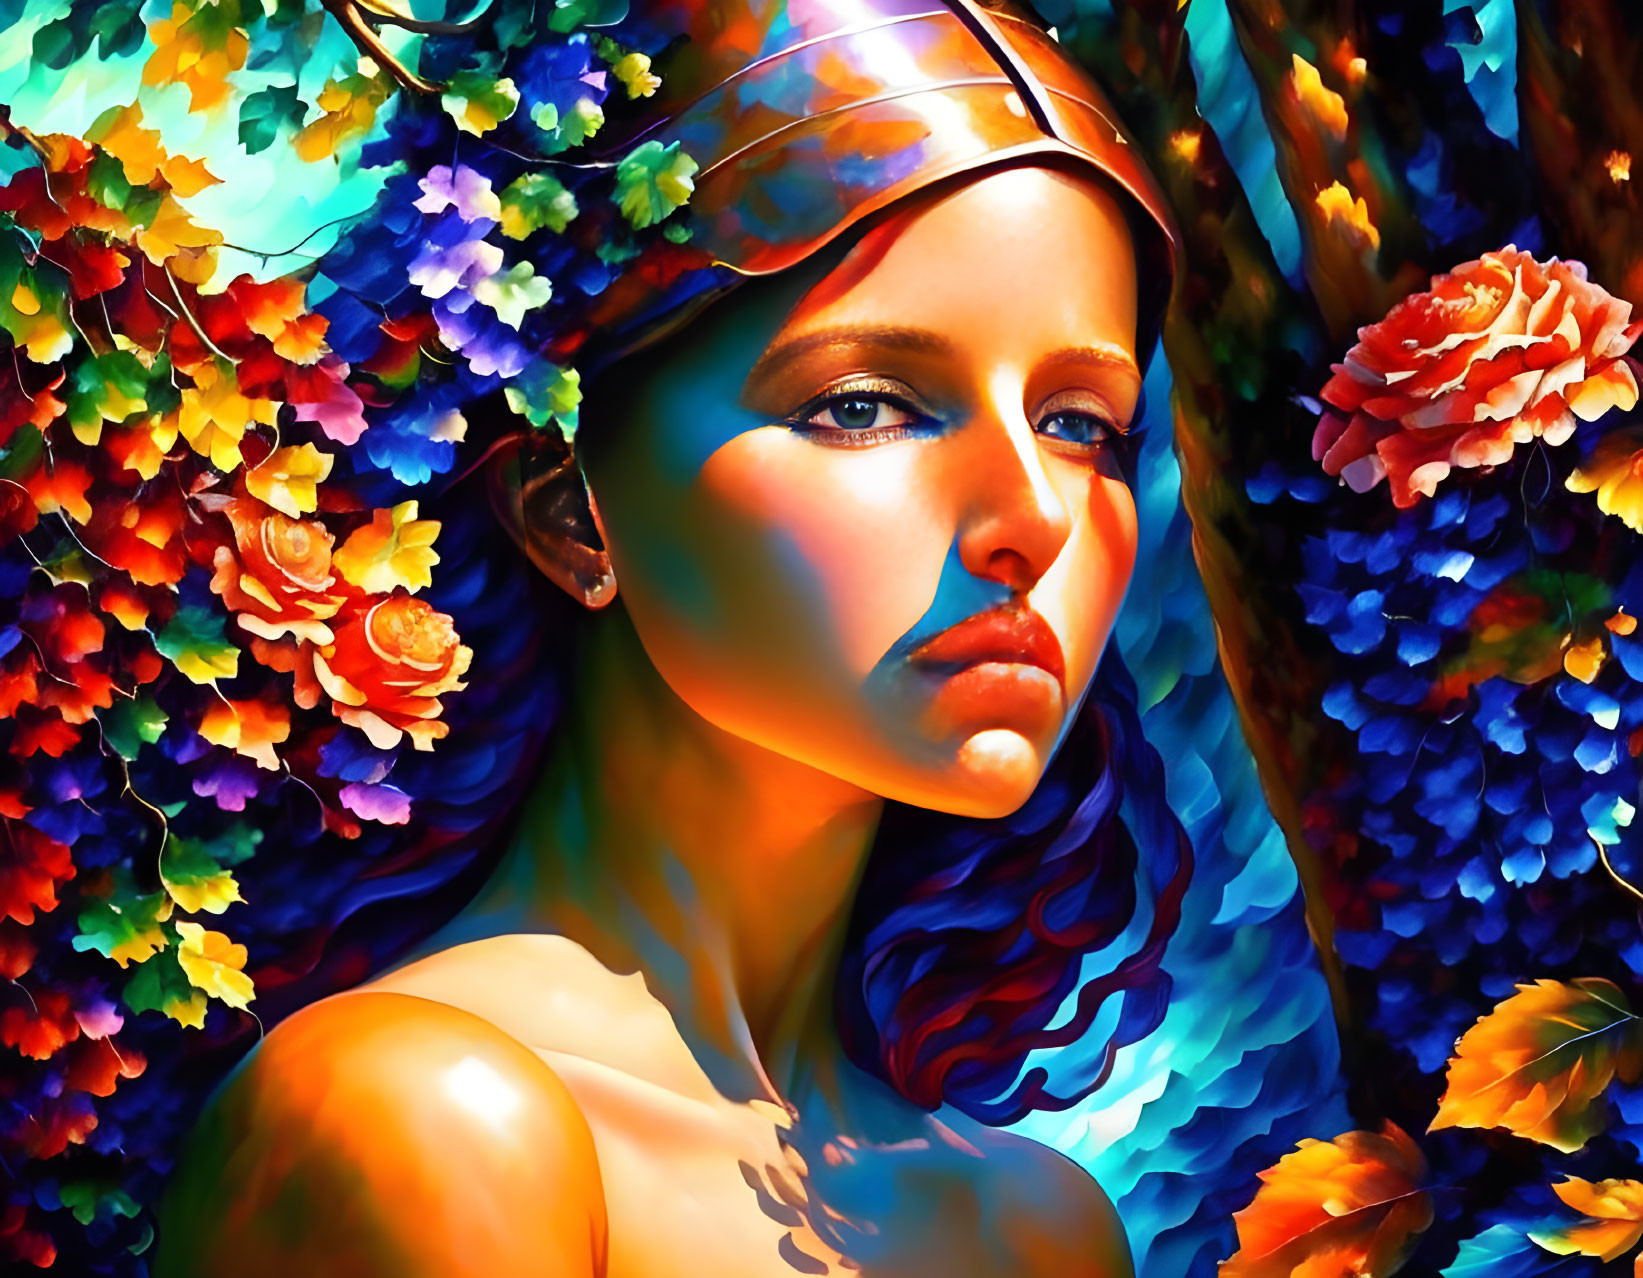 Colorful portrait of woman with flowers and dramatic lighting